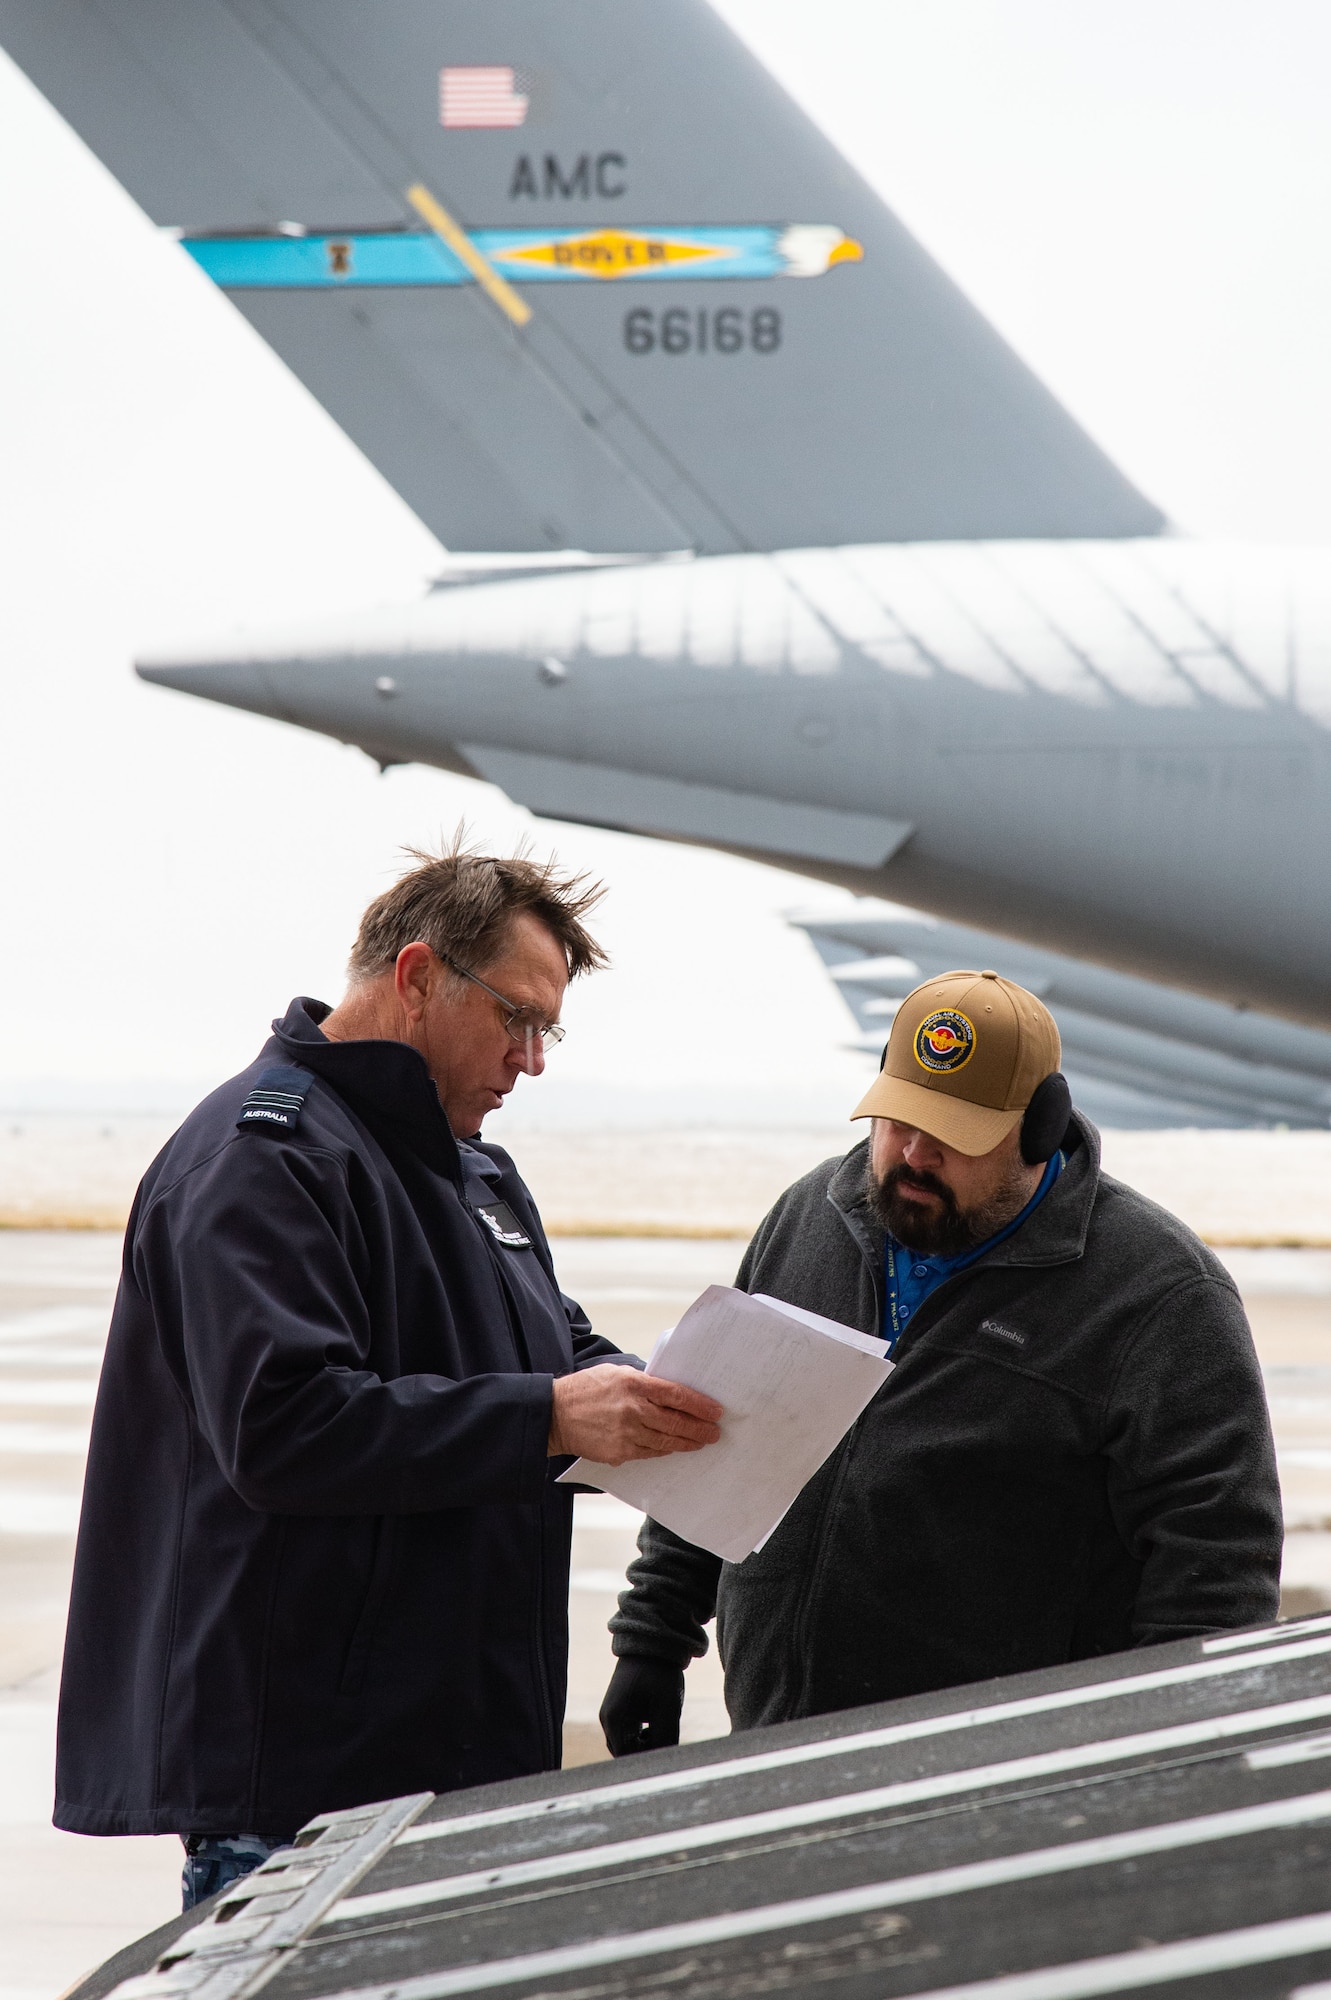 Royal Australian Air Force Squadron Leader Stephen Grimmer, left, and Matthew Buttrey, right, both assigned to the Persistent Maritime Unmanned Aircraft Systems Program Office (PMA-262) Triton – Cooperative Program out of Naval Air Station Patuxent River, Maryland, review cargo shipping documents at Dover Air Force Base, Delaware, Feb. 1, 2023. Grimmer and Buttrey are the Integrated Product Team Lead and co-lead, respectively, for the Ground Segment Execution for PMA-262 MQ-4C Triton Persistent Maritime Unmanned Aerial System Production IPT. (U.S. Air Force photo by Roland Balik)